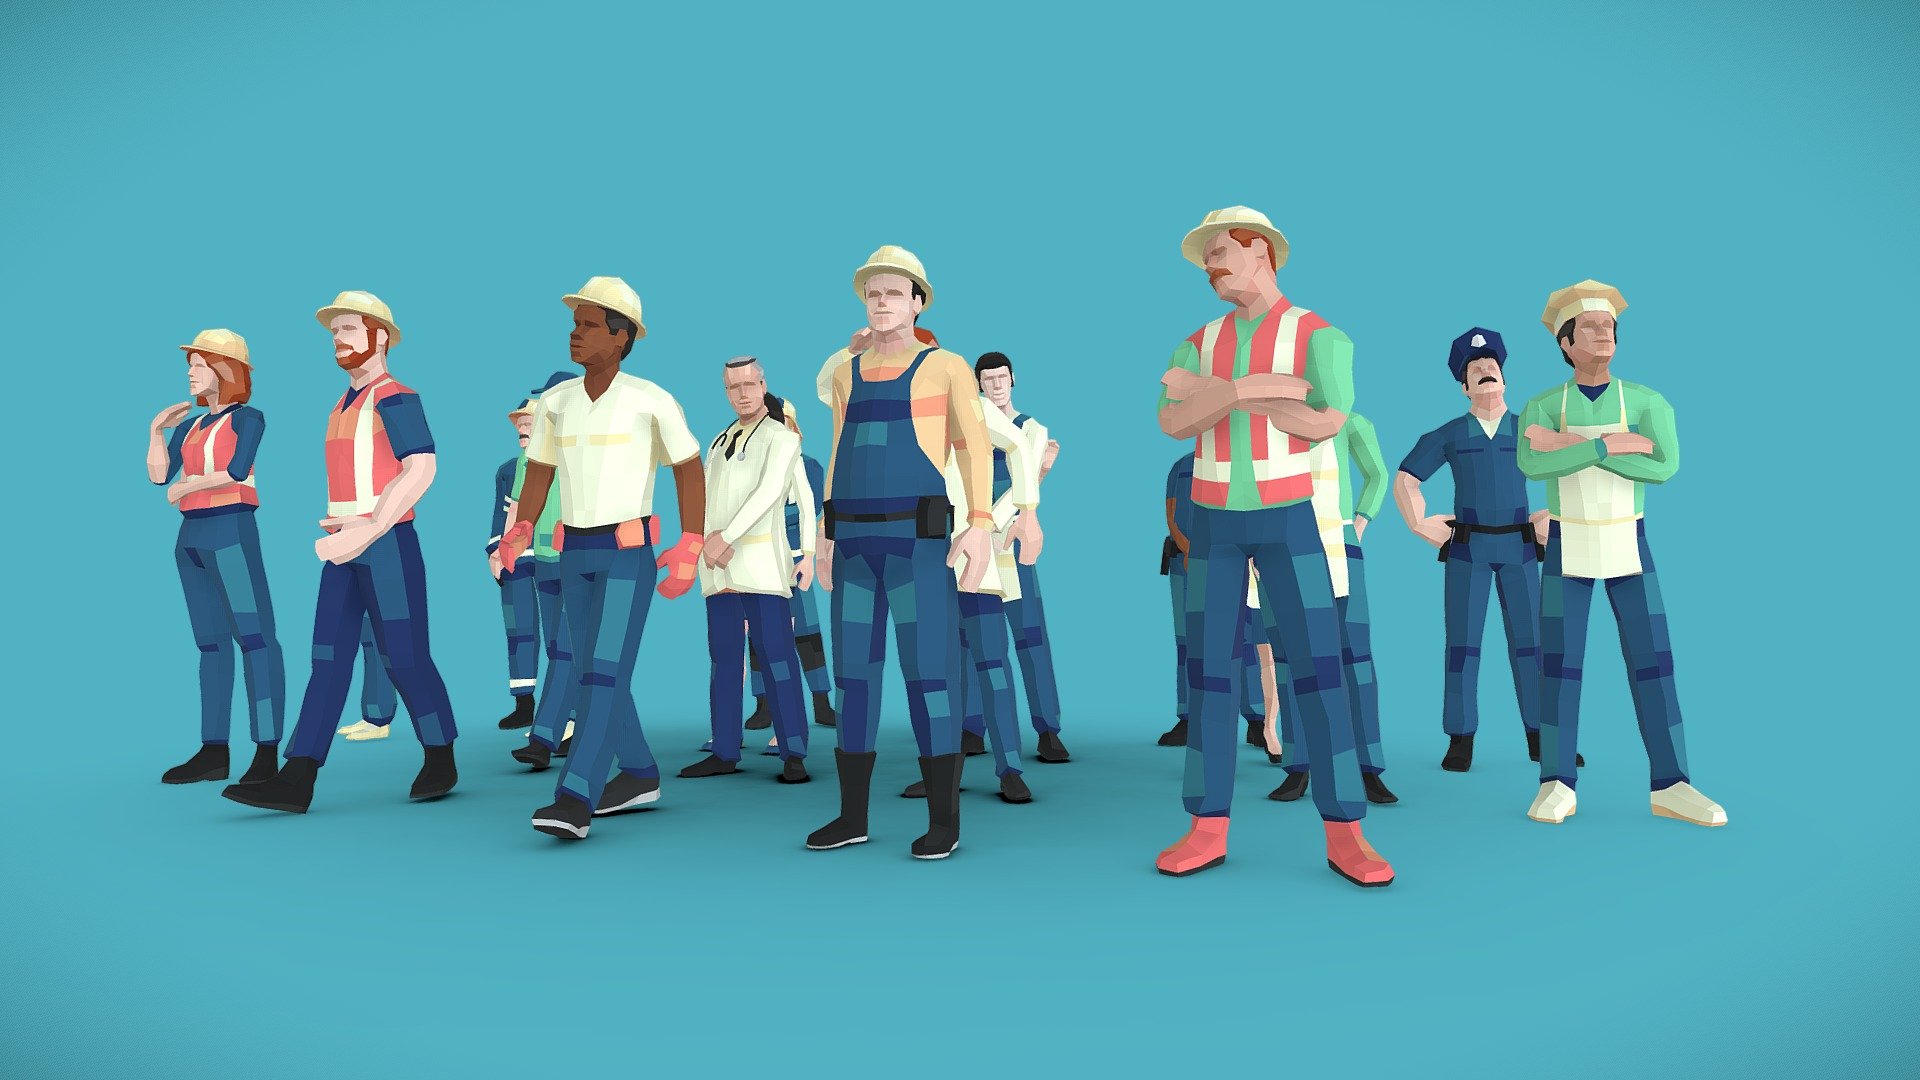 Bundle of 20 Low Poly characters representing most common professions. Great for mobile apps, animations and ArchViz. Created with 3ds Max 2022. All Rigged using Biped + Skin, see additional files for native .MAX files and FBX. UV mapping can be easily modified on 3ds Max using px Poly Paint Script. Tested for compatibility with Unity Engine Humanoid system.

This set is already part of the 100-Mega-Pack.

Try free samples!

Easy texture customization:

 - Low Poly 3D Professional People Rigged Pack - Buy Royalty Free 3D model by Denys Almaral (@denysalmaral) 3d model